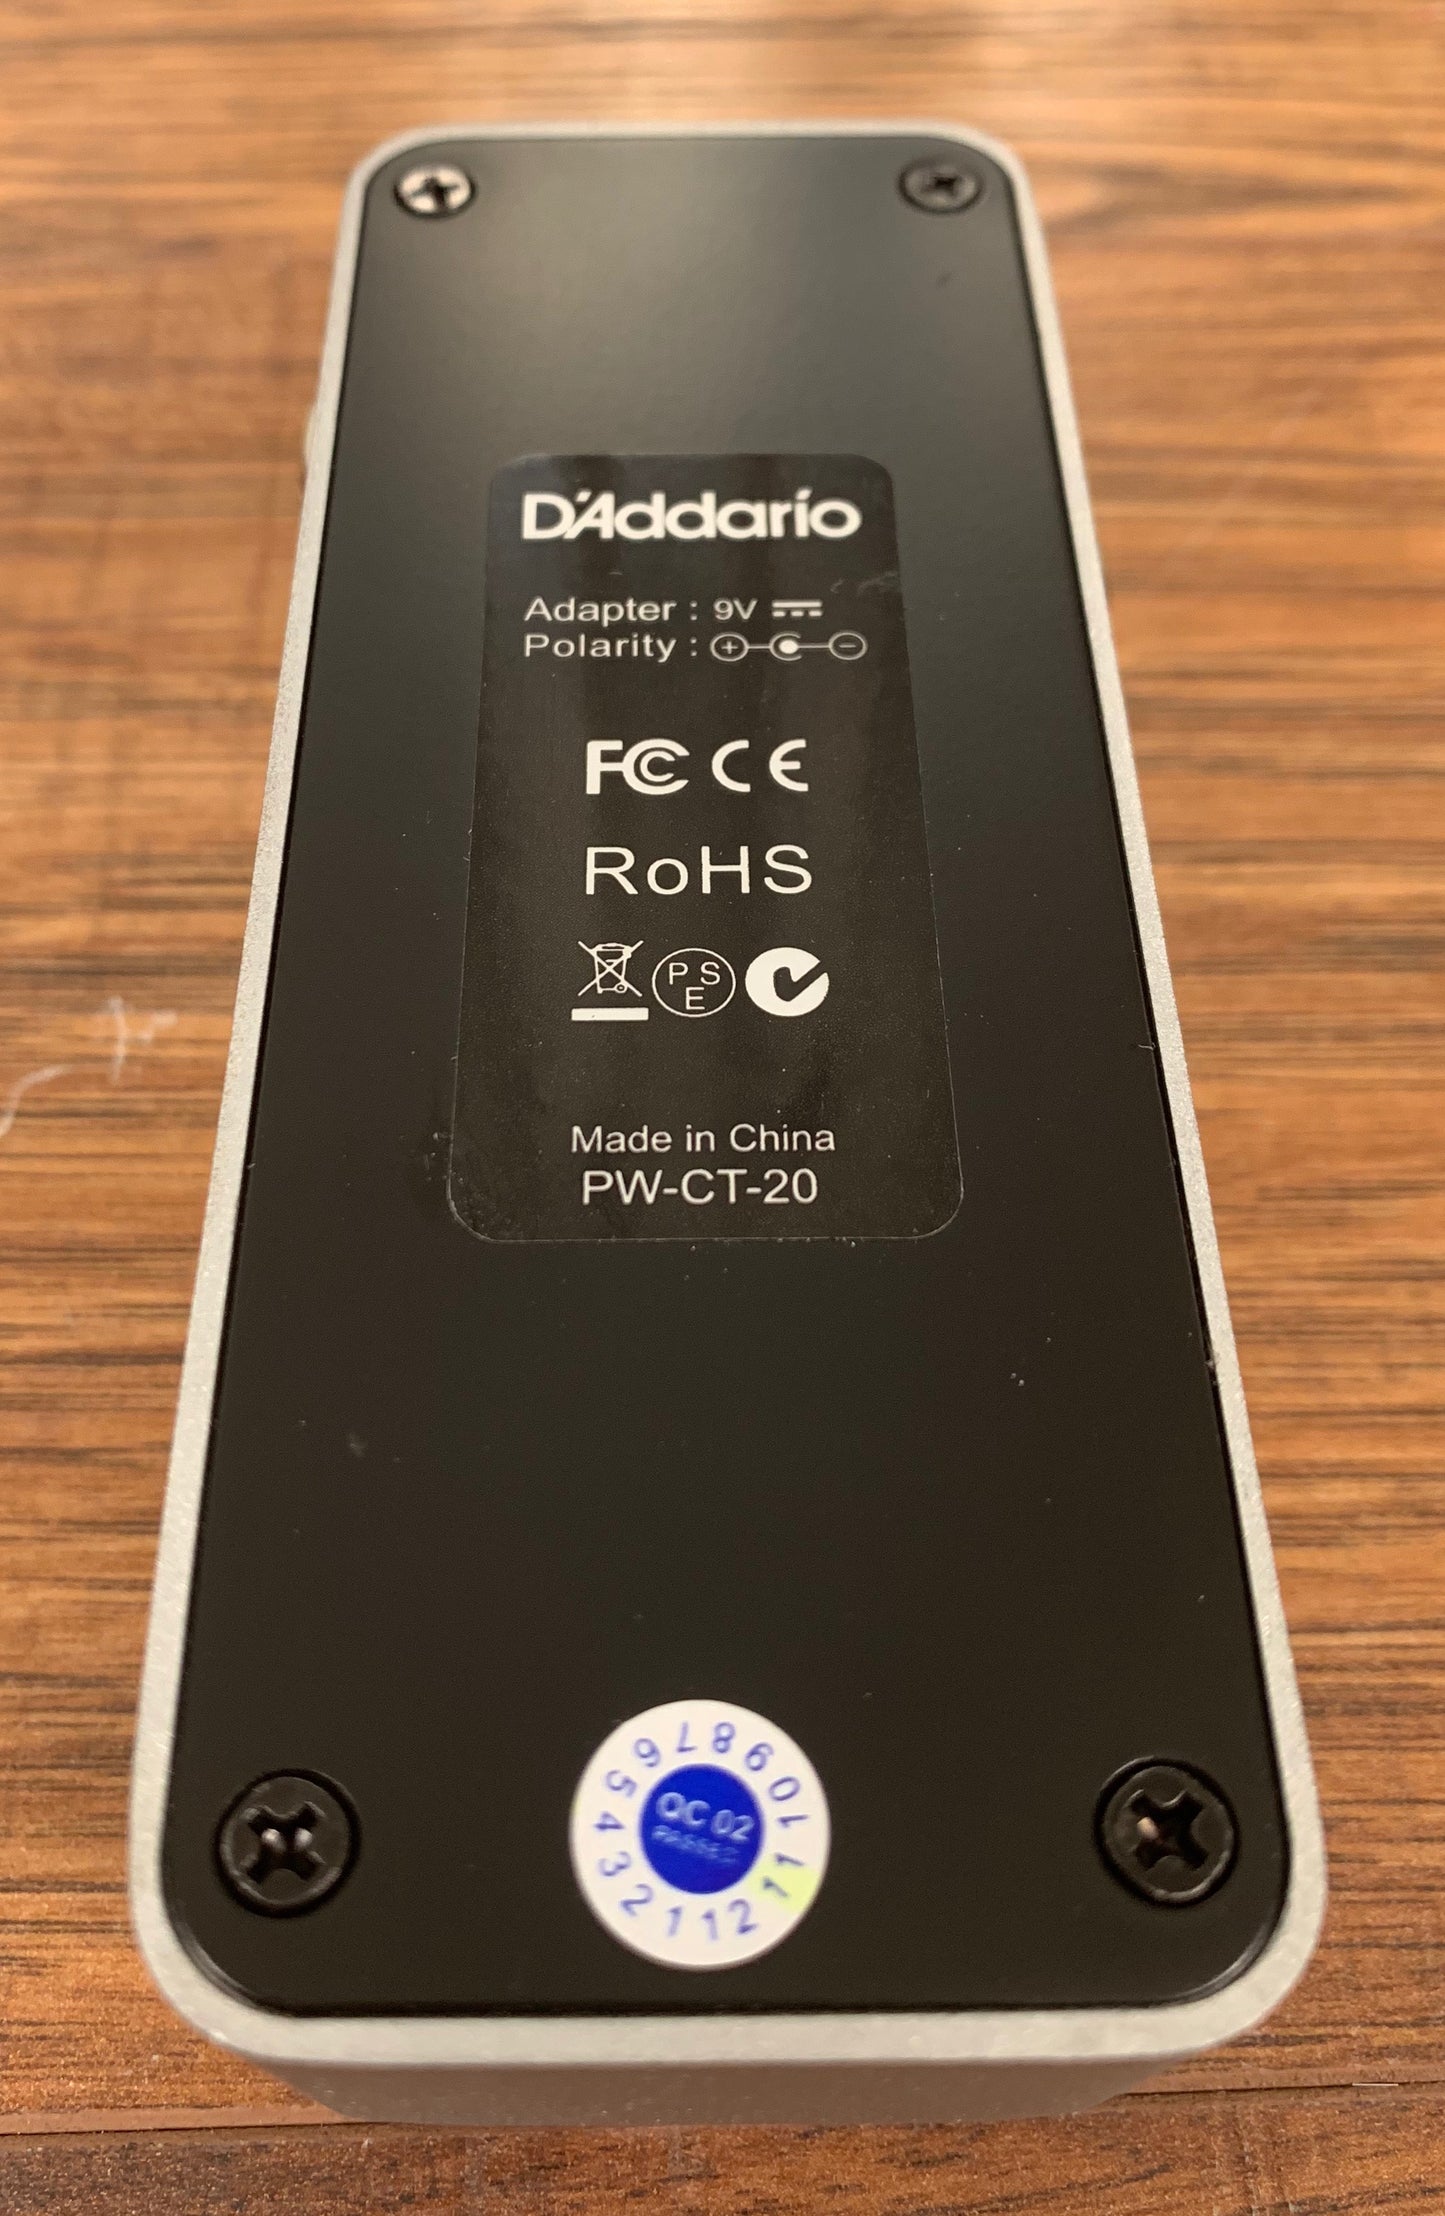 D'Addario Planet Waves PW-CT-20 Chromatic Tuner Guitar Effect Pedal